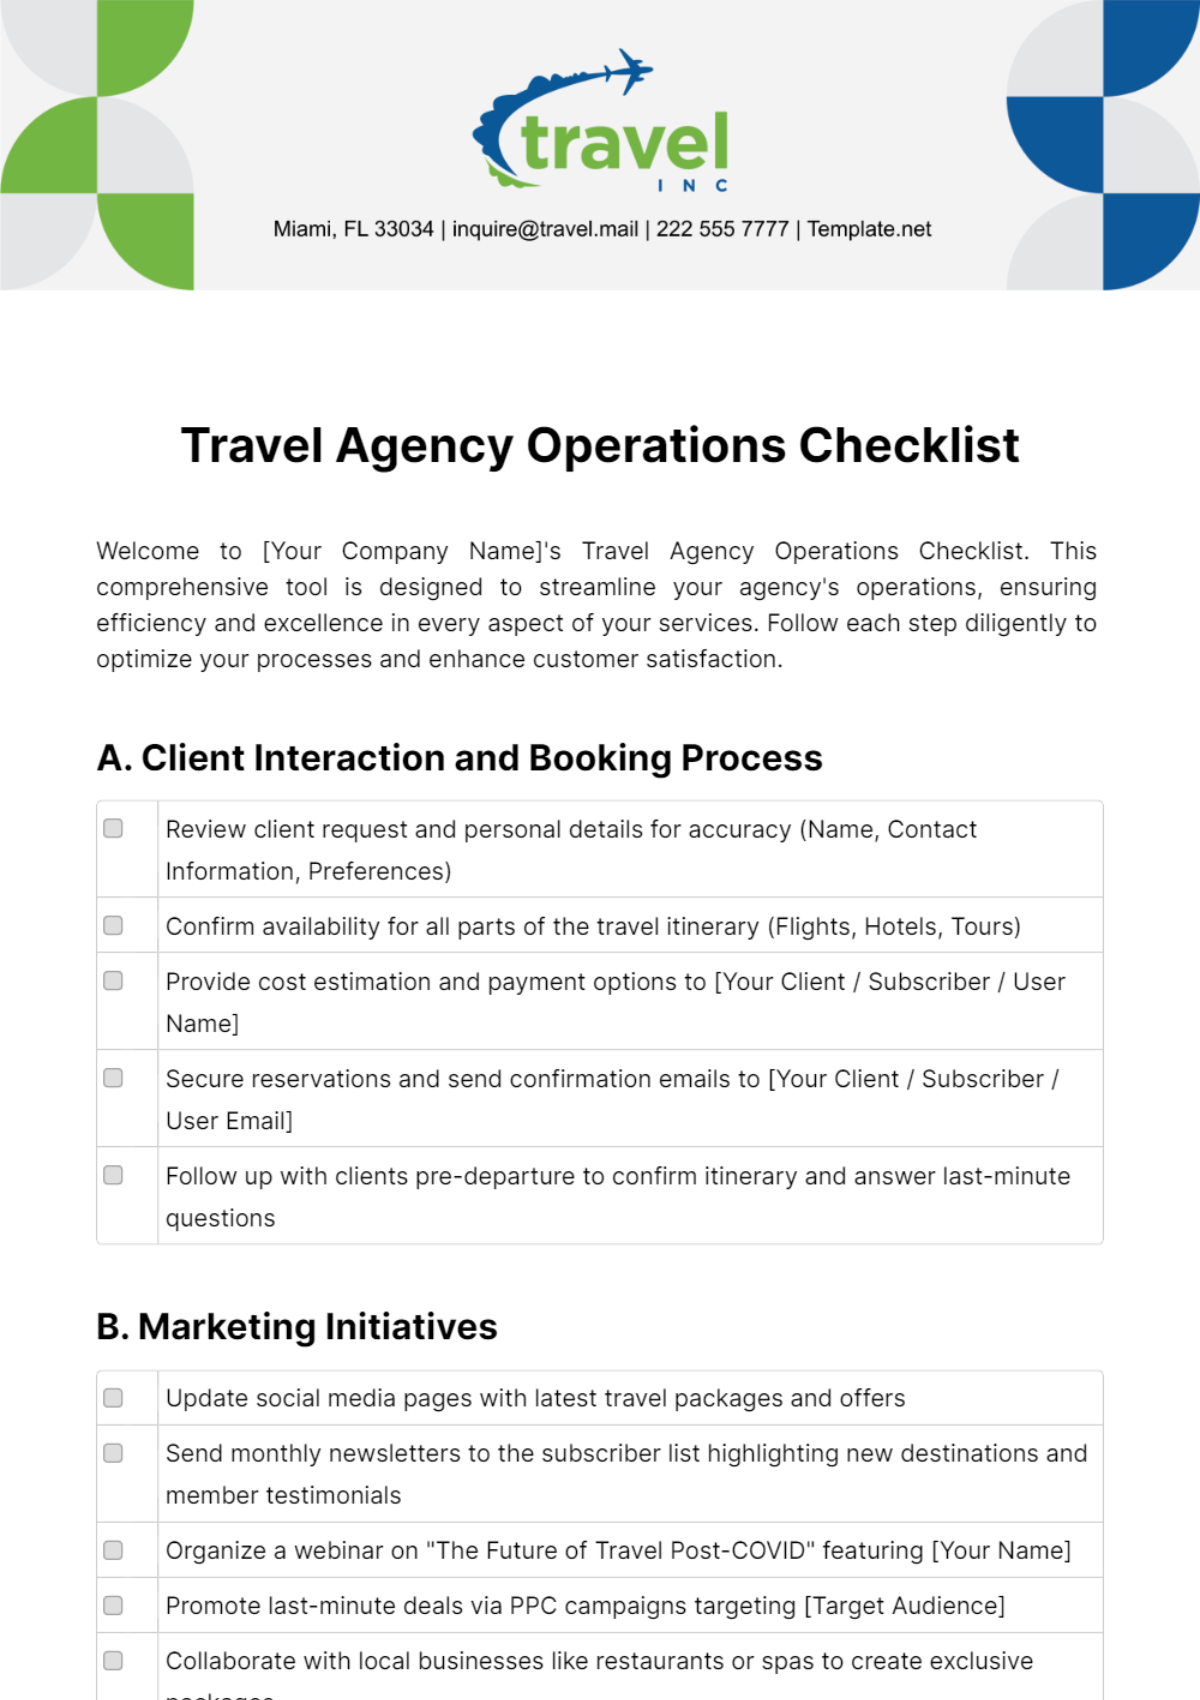 Travel Agency Operations Checklist Template